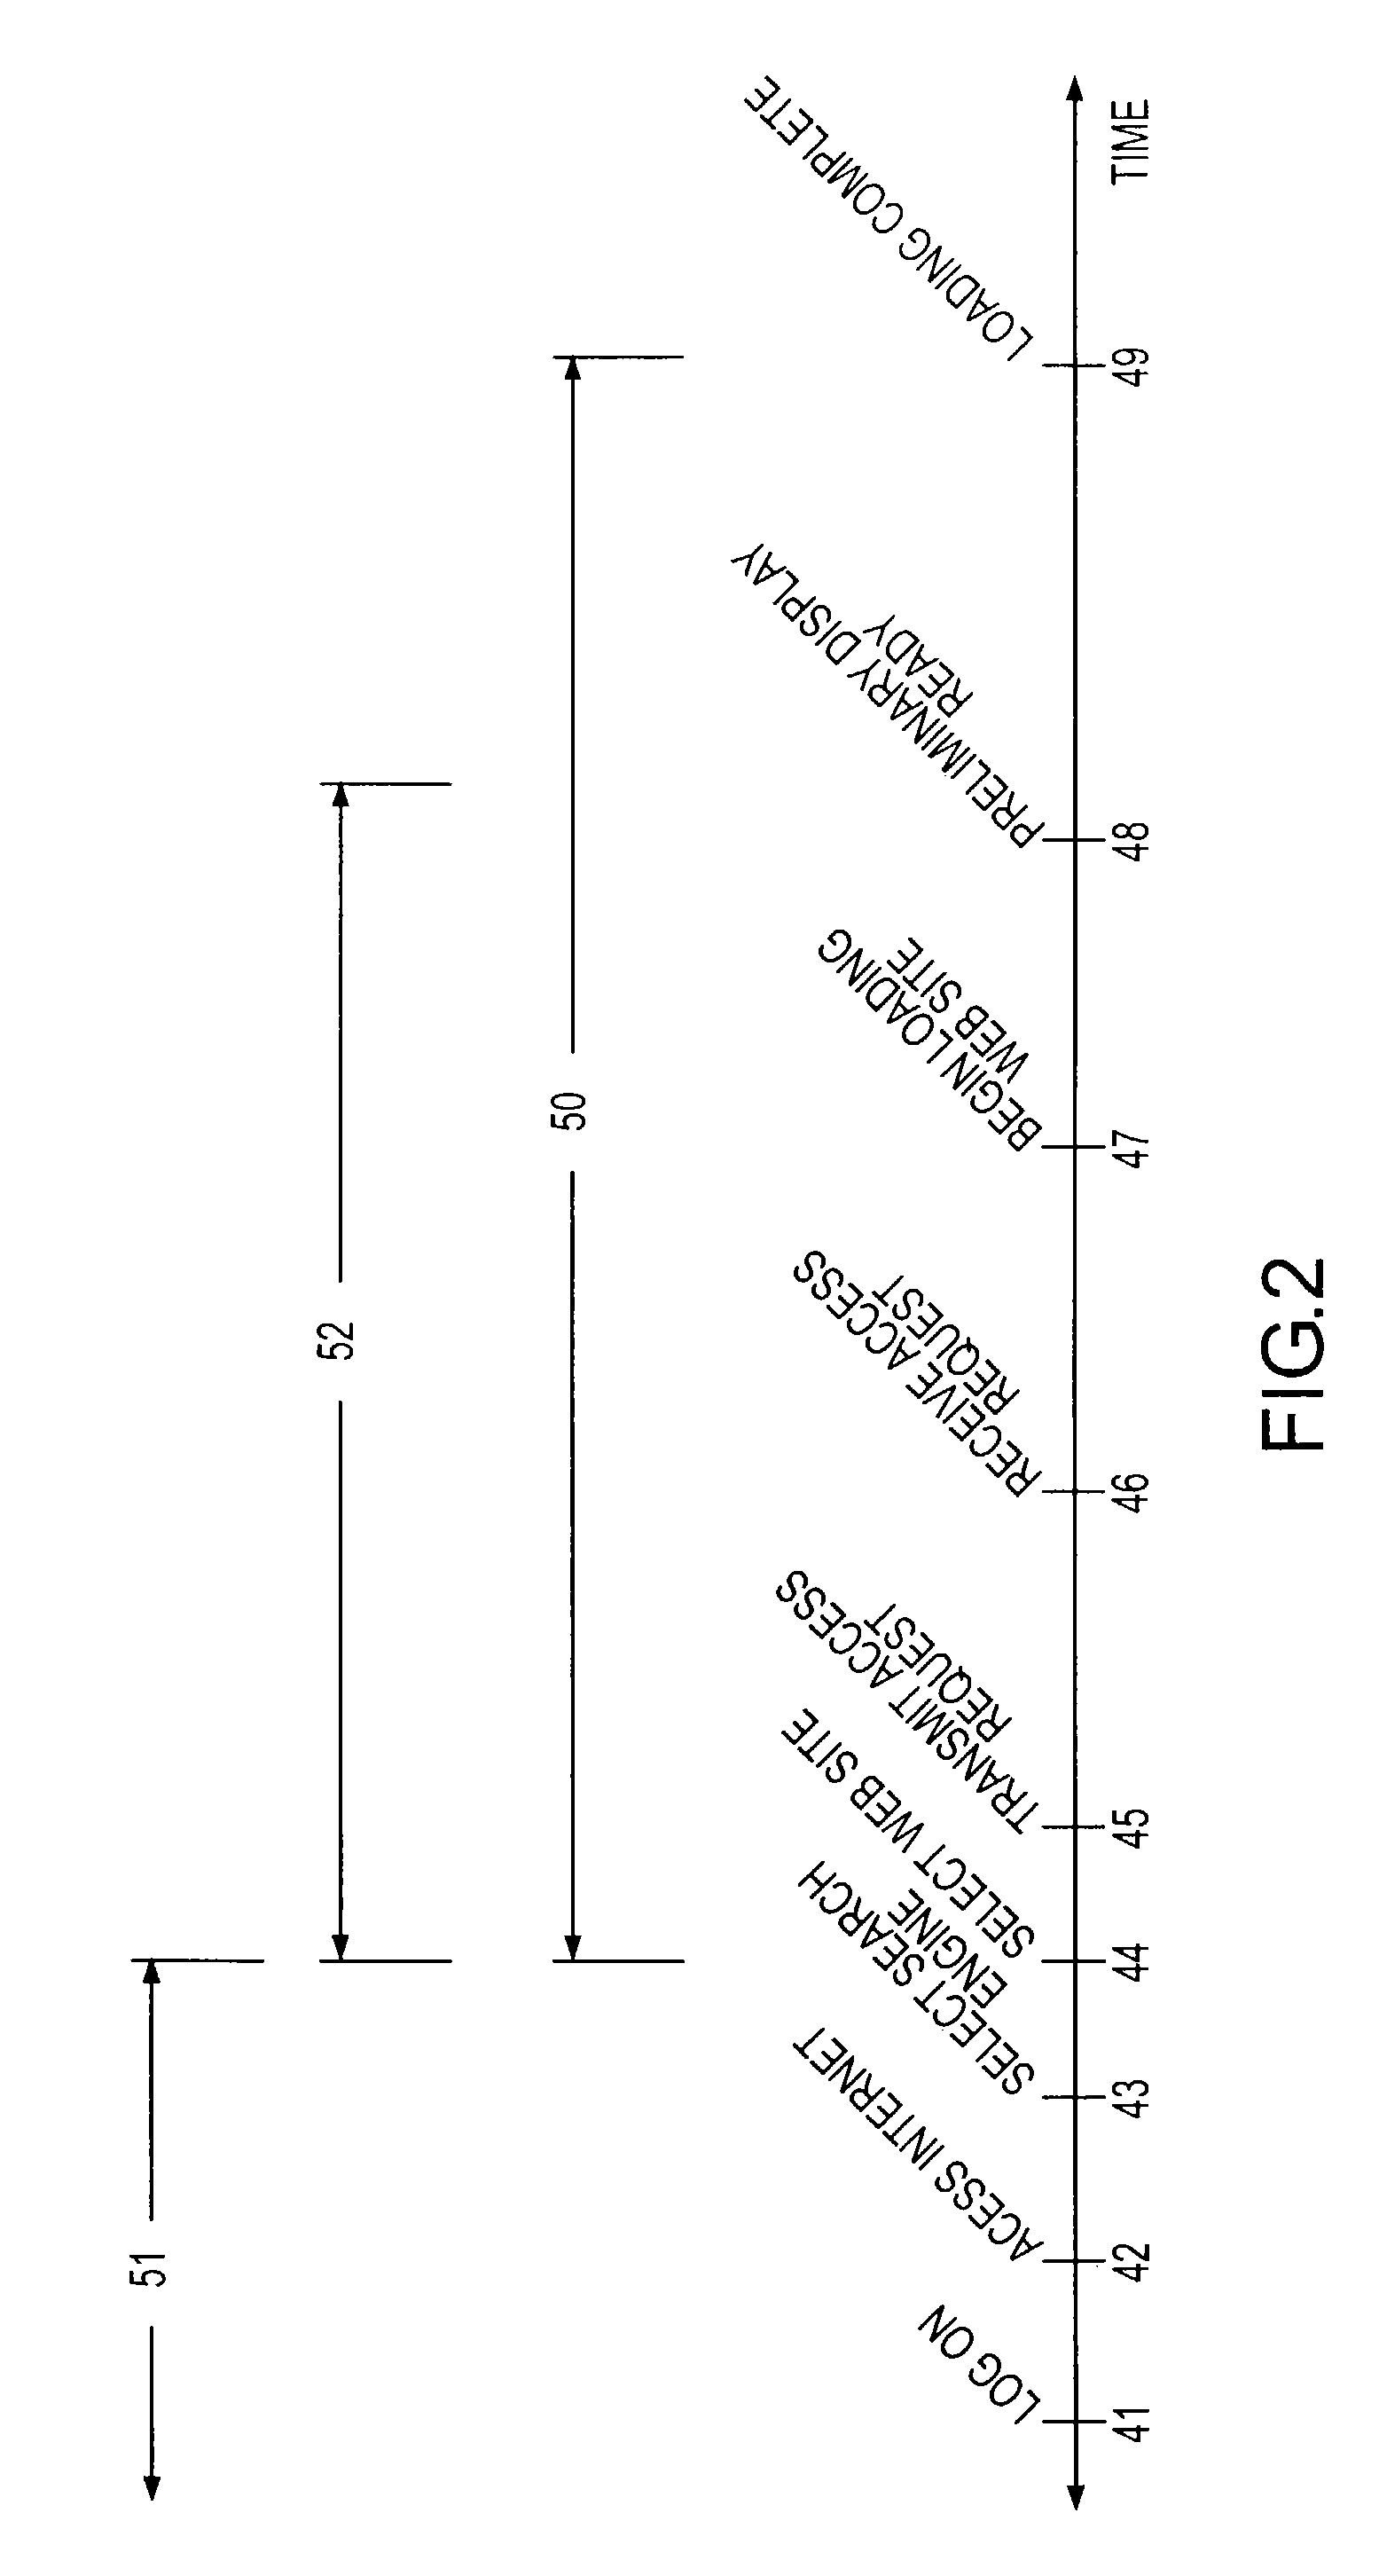 Method for providing node targeted content in an addressable network